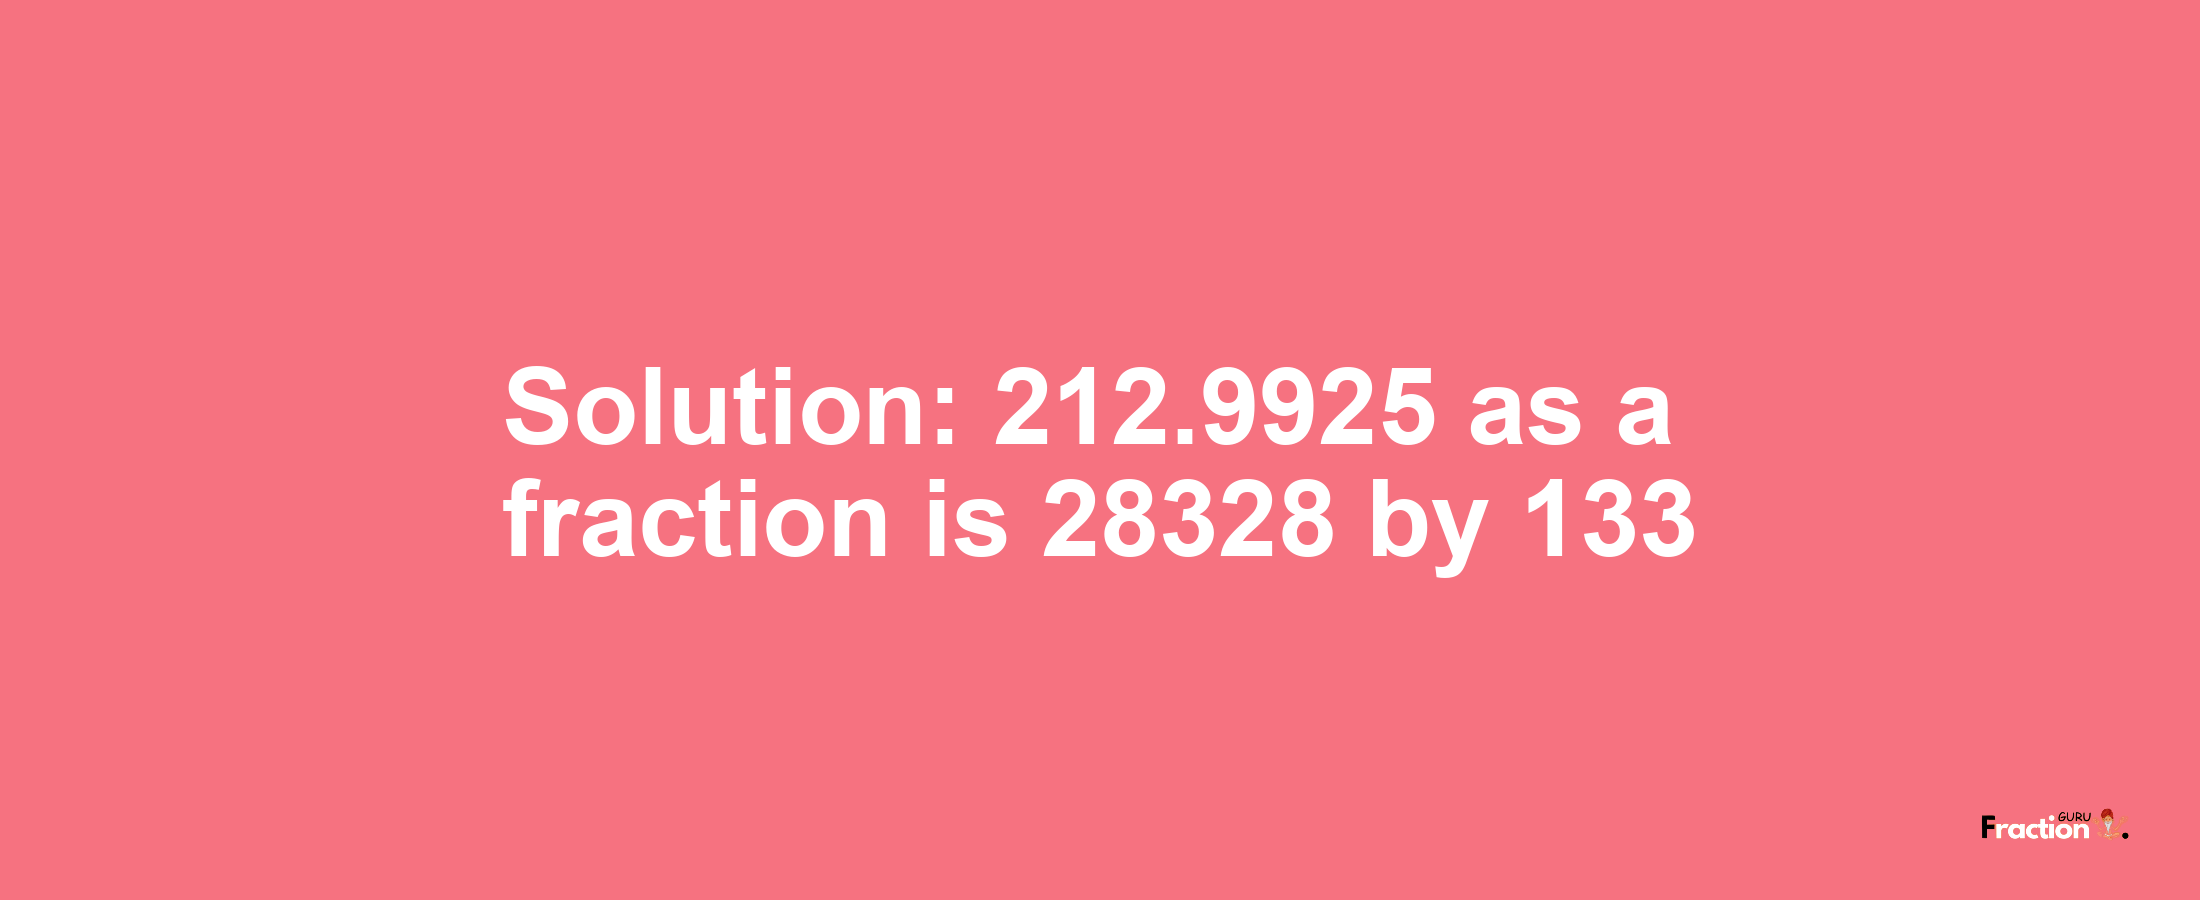 Solution:212.9925 as a fraction is 28328/133